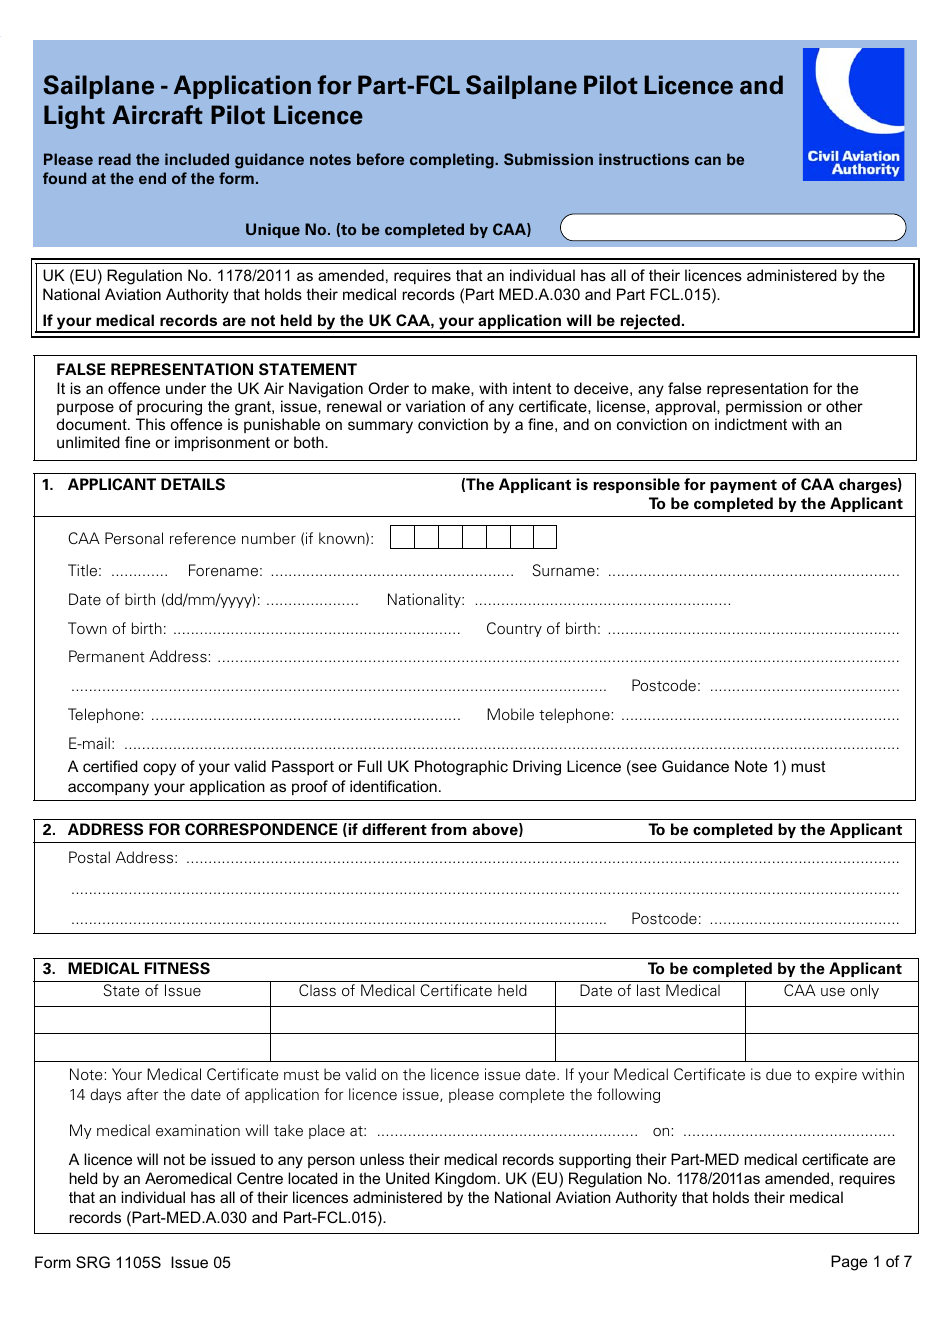 Form SRG1105S Sailplane - Application for Part-Fcl Sailplane Pilot Licence and Light Aircraft Pilot Licence - United Kingdom, Page 1